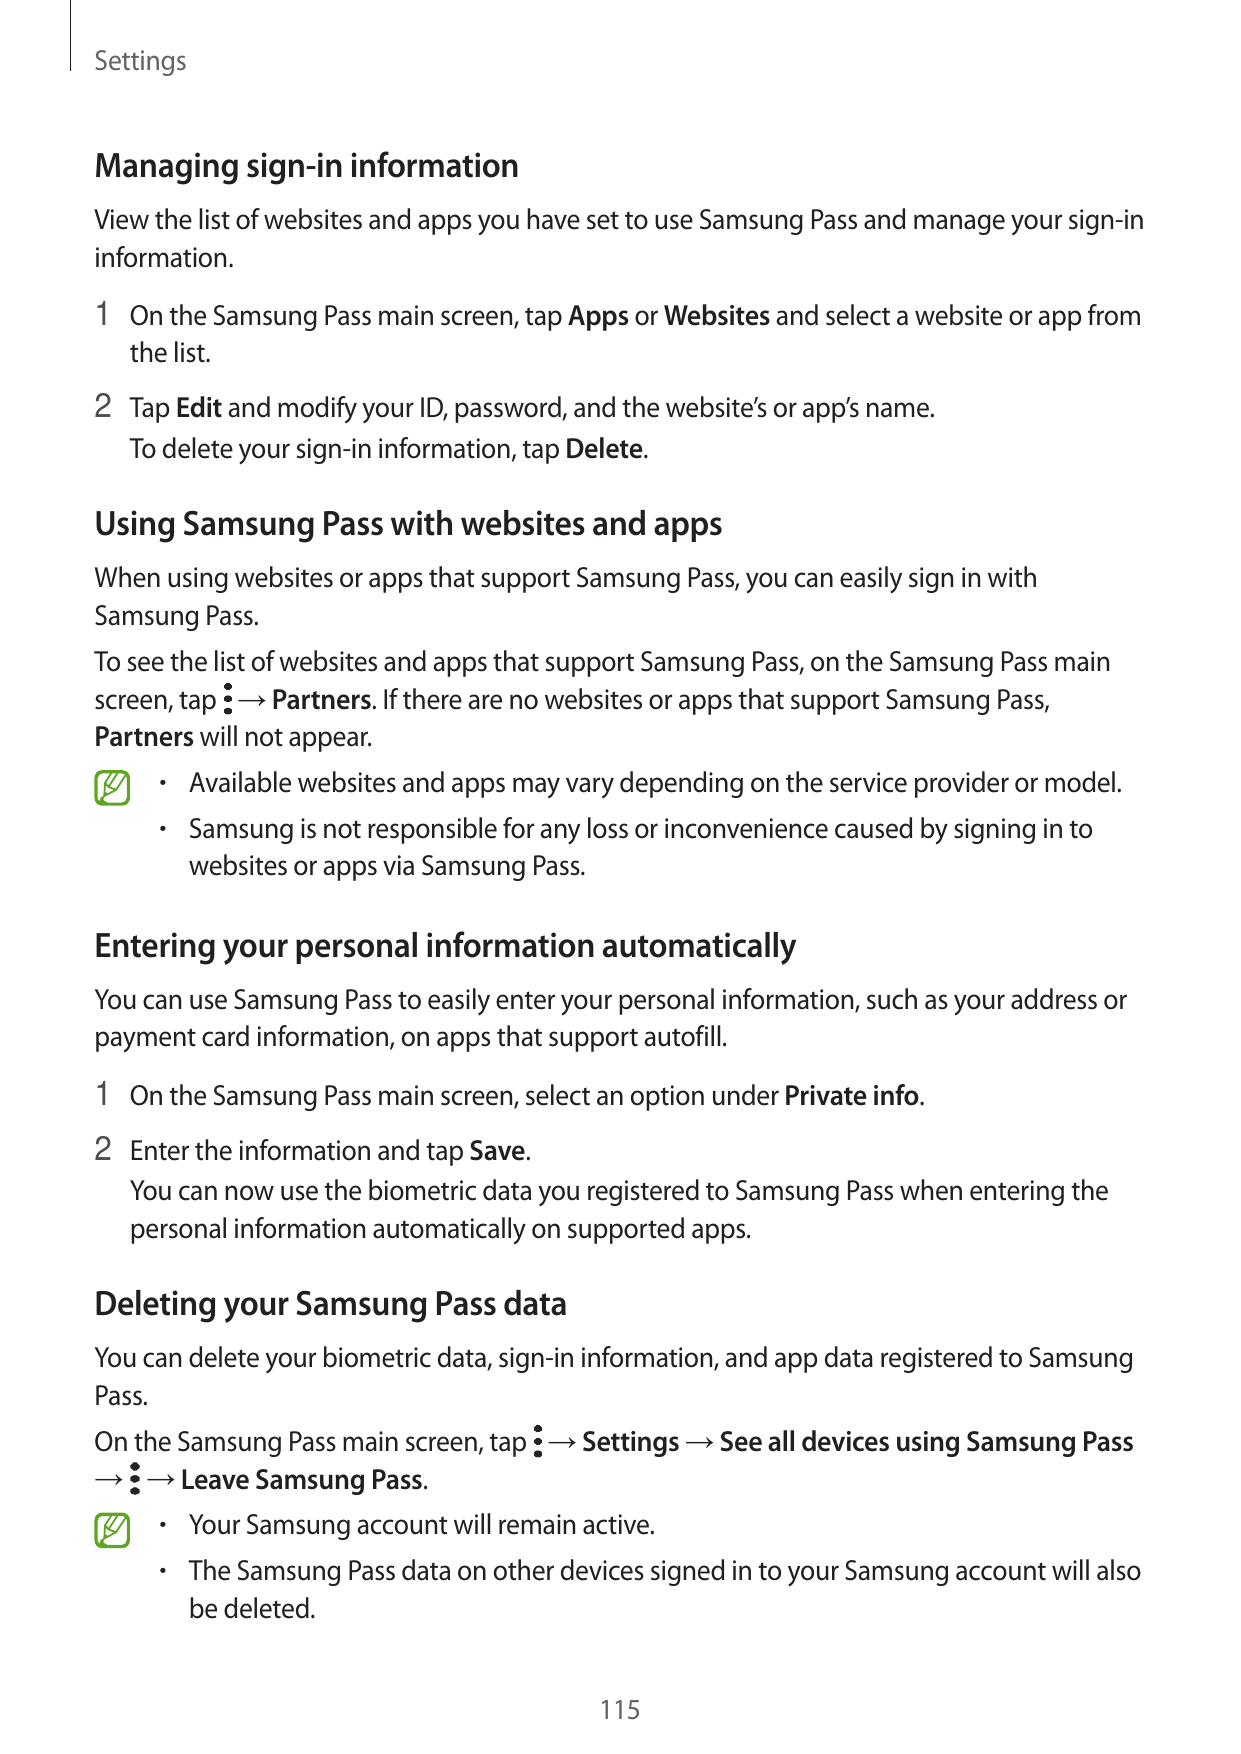 SettingsManaging sign-in informationView the list of websites and apps you have set to use Samsung Pass and manage your sign-ini